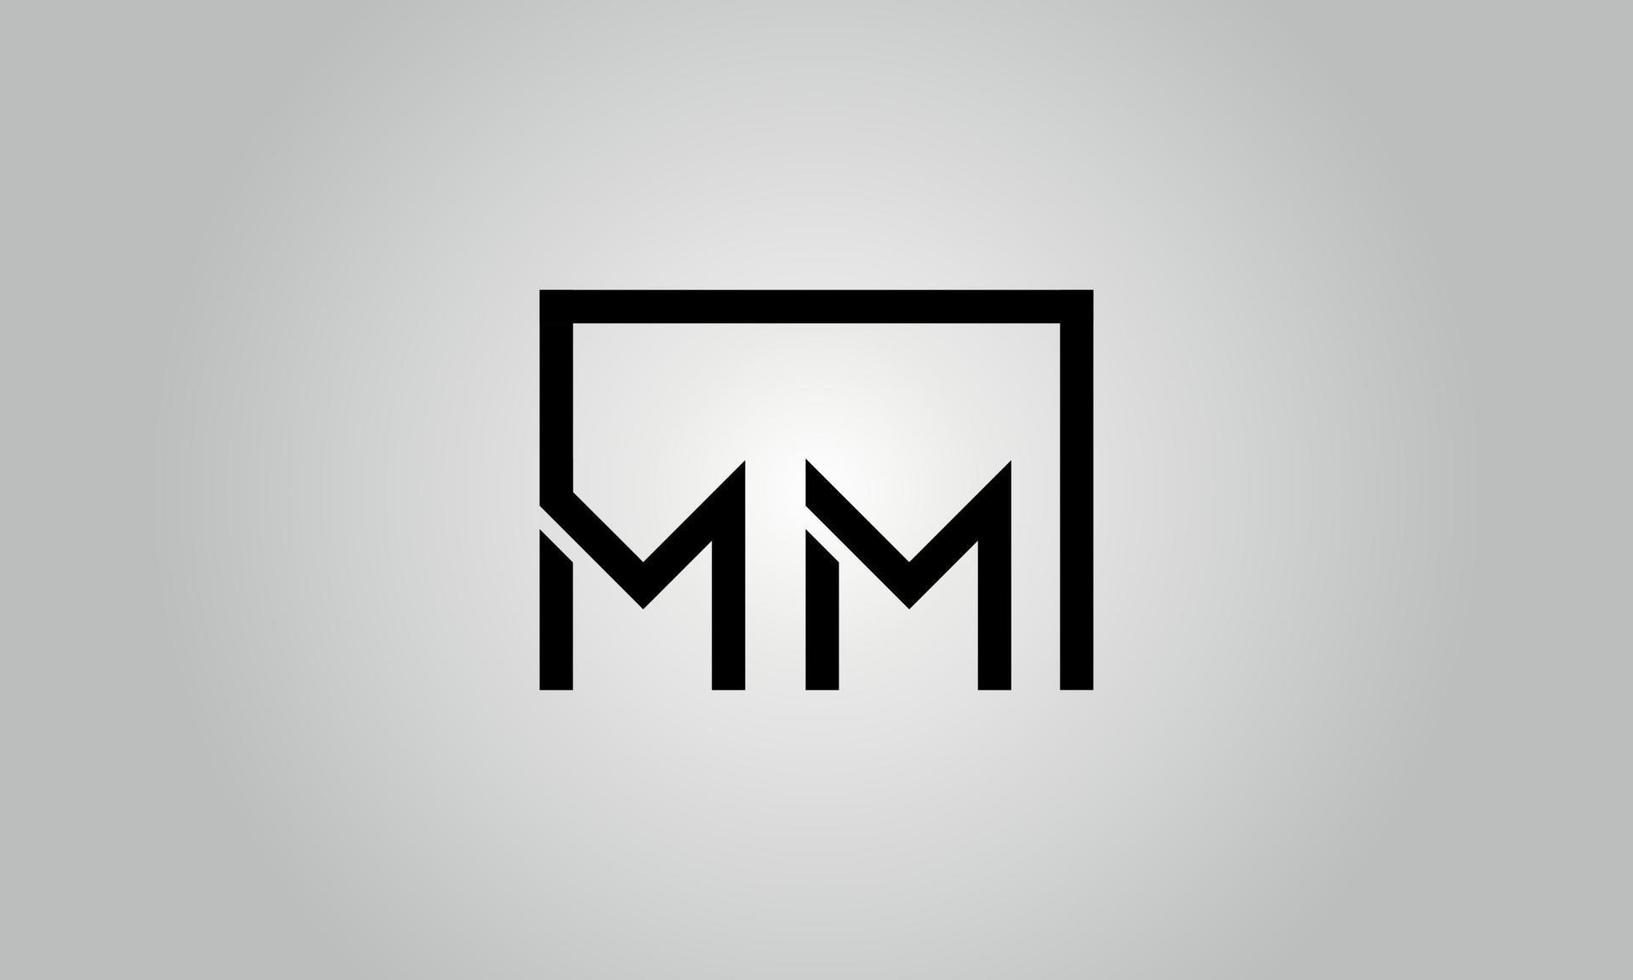 Letter MM logo design. MM logo with square shape in black colors vector free vector template.